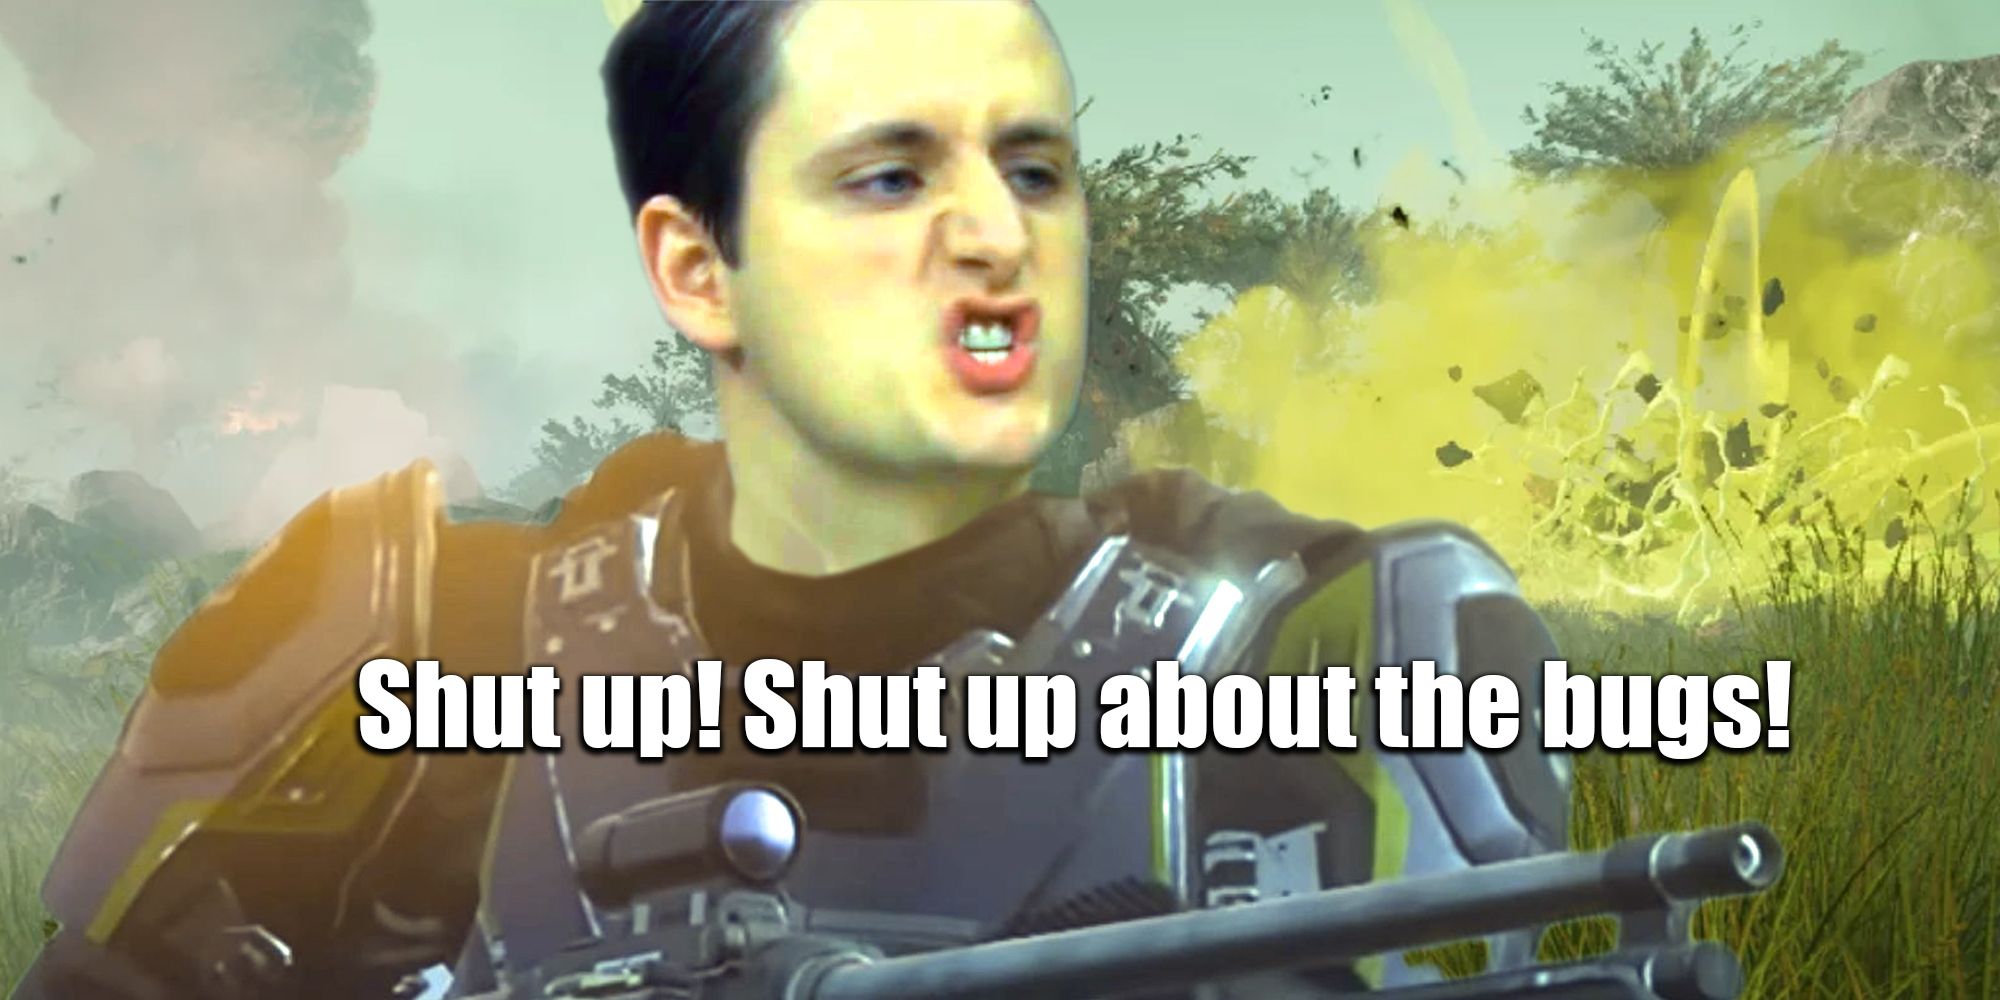 Gabe Lewis from The Office in a Helldiver suit, holding a rifle and shouting 